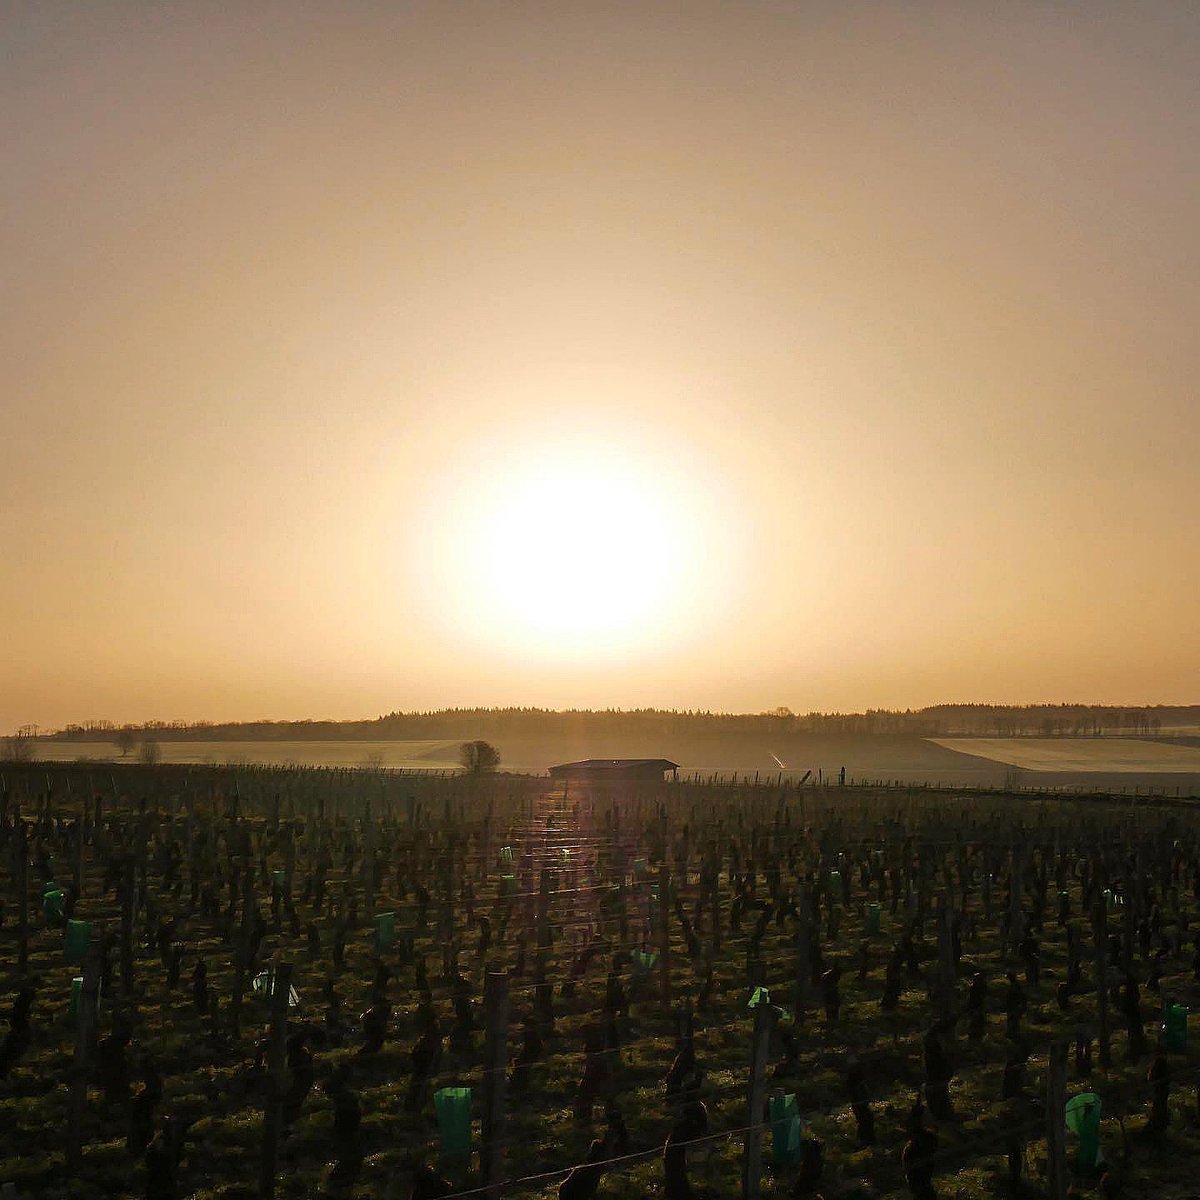 Spring is slowly coming ☀️ #burgundy #cotedor #domaineaegerter